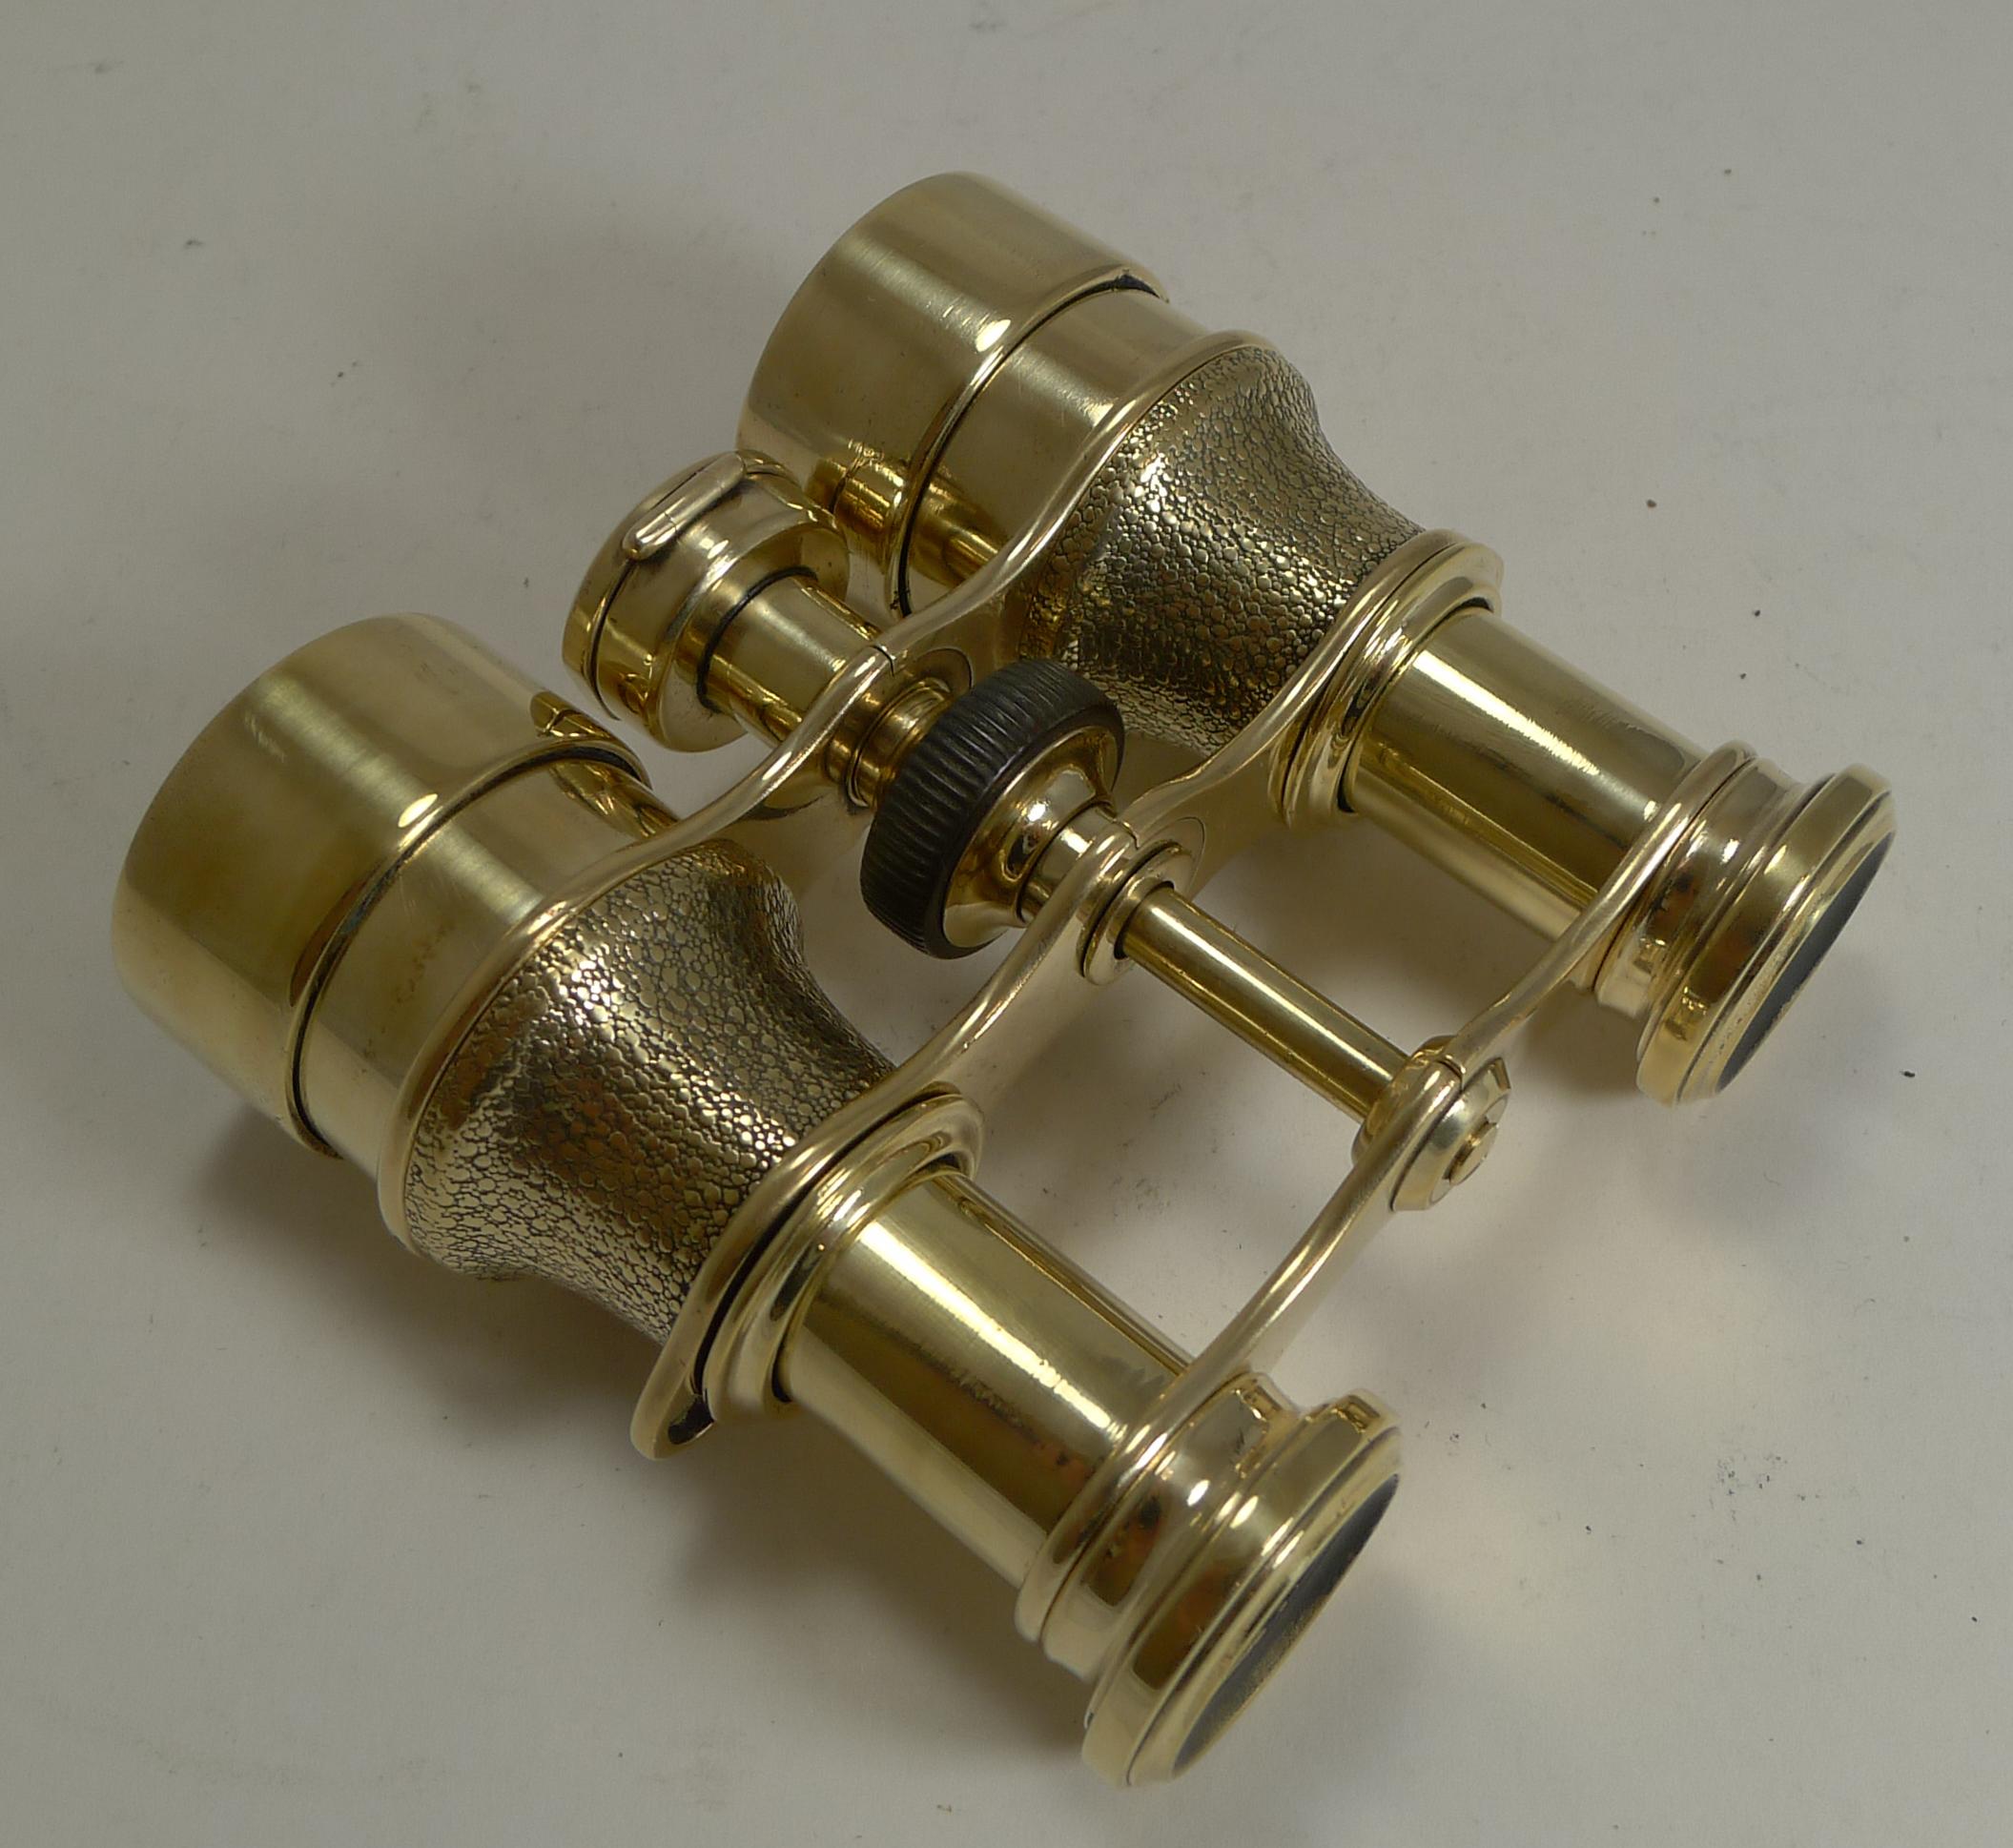 Early 20th Century Antique English Field Glasses or Binoculars by Lawrence and Mayo, with Compass